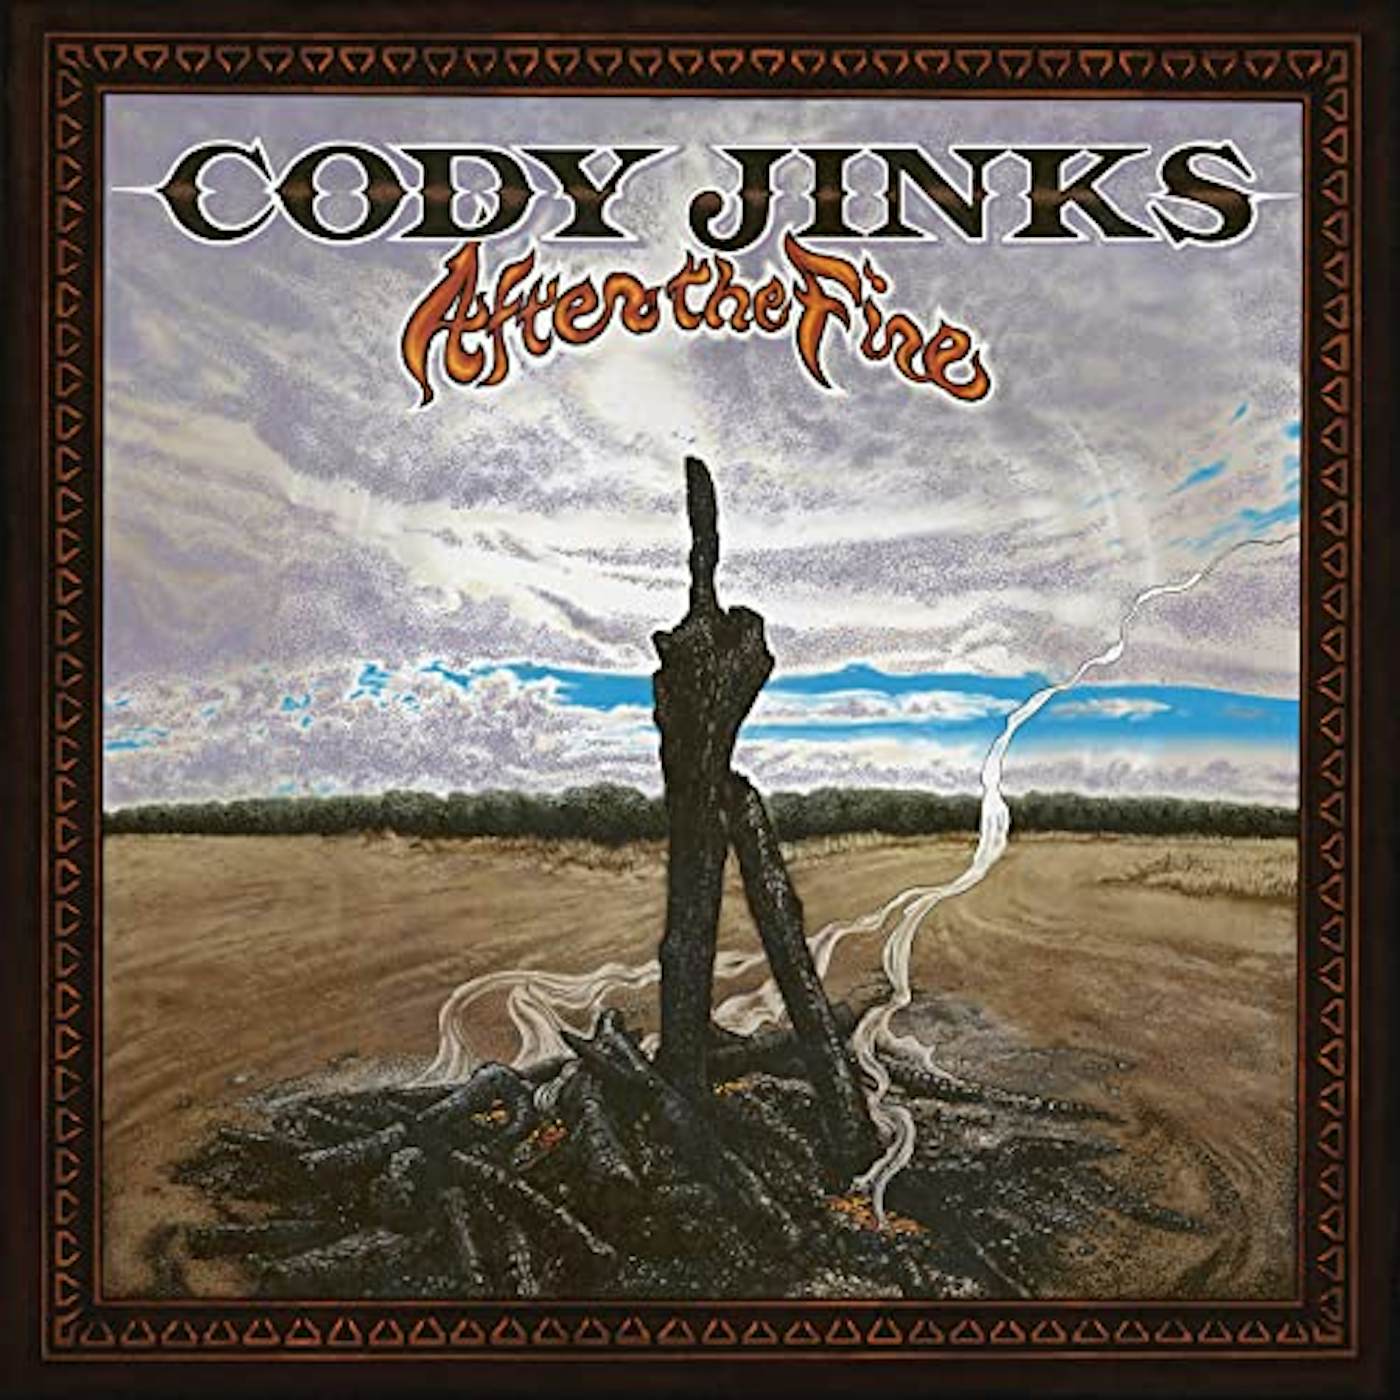 Cody Jinks AFTER THE FIRE CD